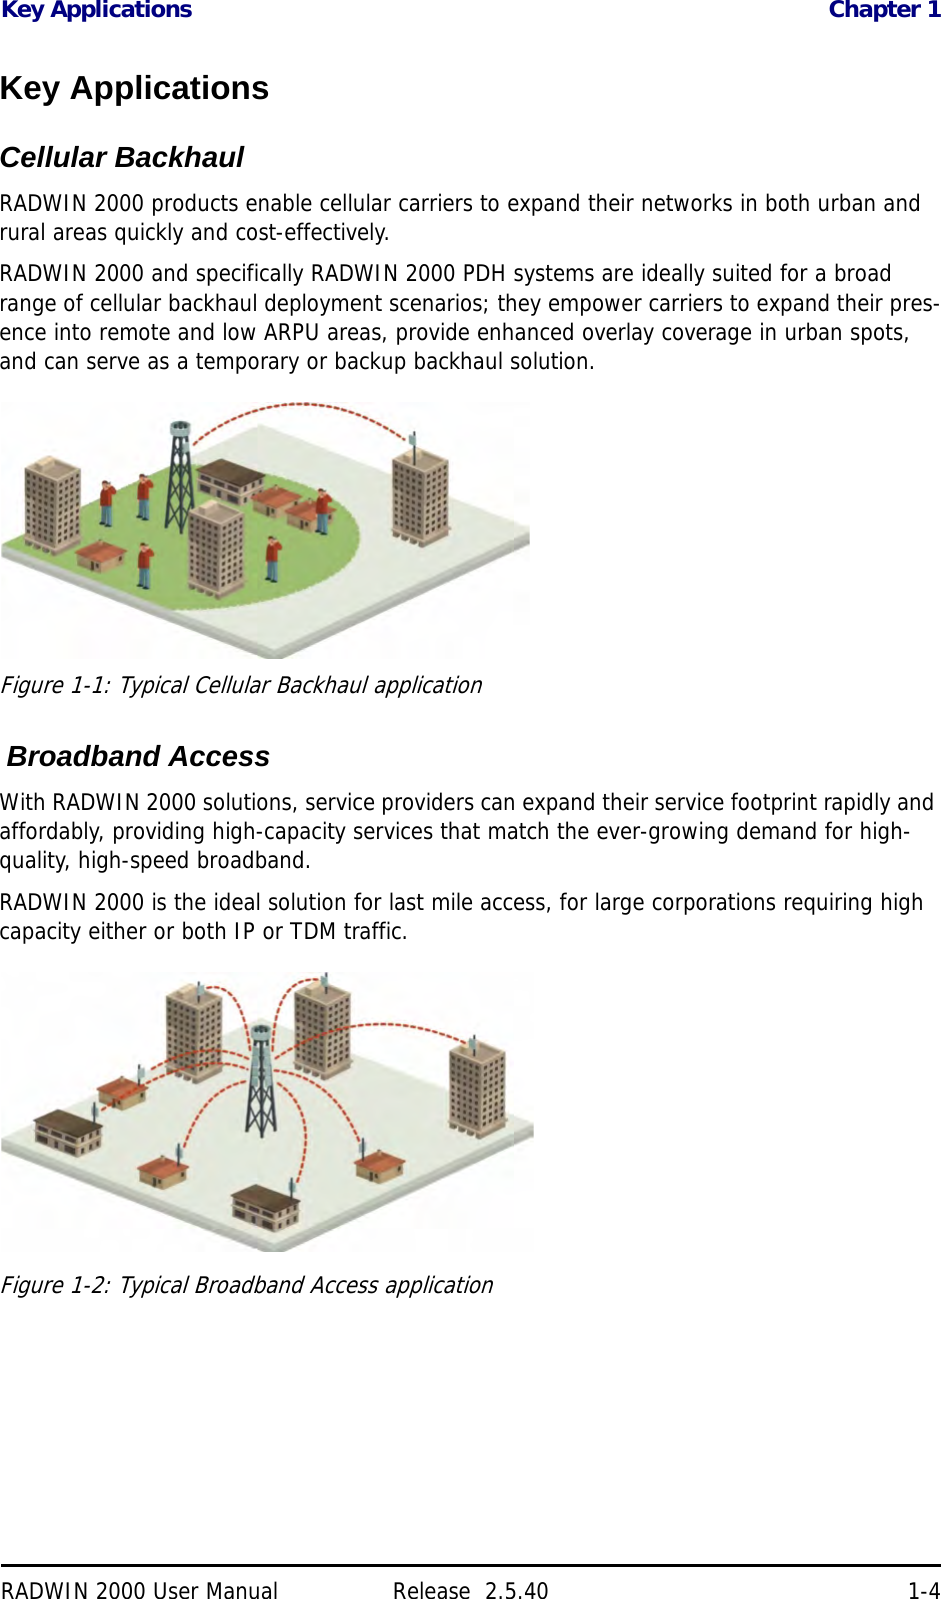 Key Applications Chapter 1RADWIN 2000 User Manual Release  2.5.40 1-4Key ApplicationsCellular BackhaulRADWIN 2000 products enable cellular carriers to expand their networks in both urban and rural areas quickly and cost-effectively. RADWIN 2000 and specifically RADWIN 2000 PDH systems are ideally suited for a broad range of cellular backhaul deployment scenarios; they empower carriers to expand their pres-ence into remote and low ARPU areas, provide enhanced overlay coverage in urban spots, and can serve as a temporary or backup backhaul solution.Figure 1-1: Typical Cellular Backhaul application  Broadband AccessWith RADWIN 2000 solutions, service providers can expand their service footprint rapidly and affordably, providing high-capacity services that match the ever-growing demand for high-quality, high-speed broadband.RADWIN 2000 is the ideal solution for last mile access, for large corporations requiring high capacity either or both IP or TDM traffic.Figure 1-2: Typical Broadband Access application